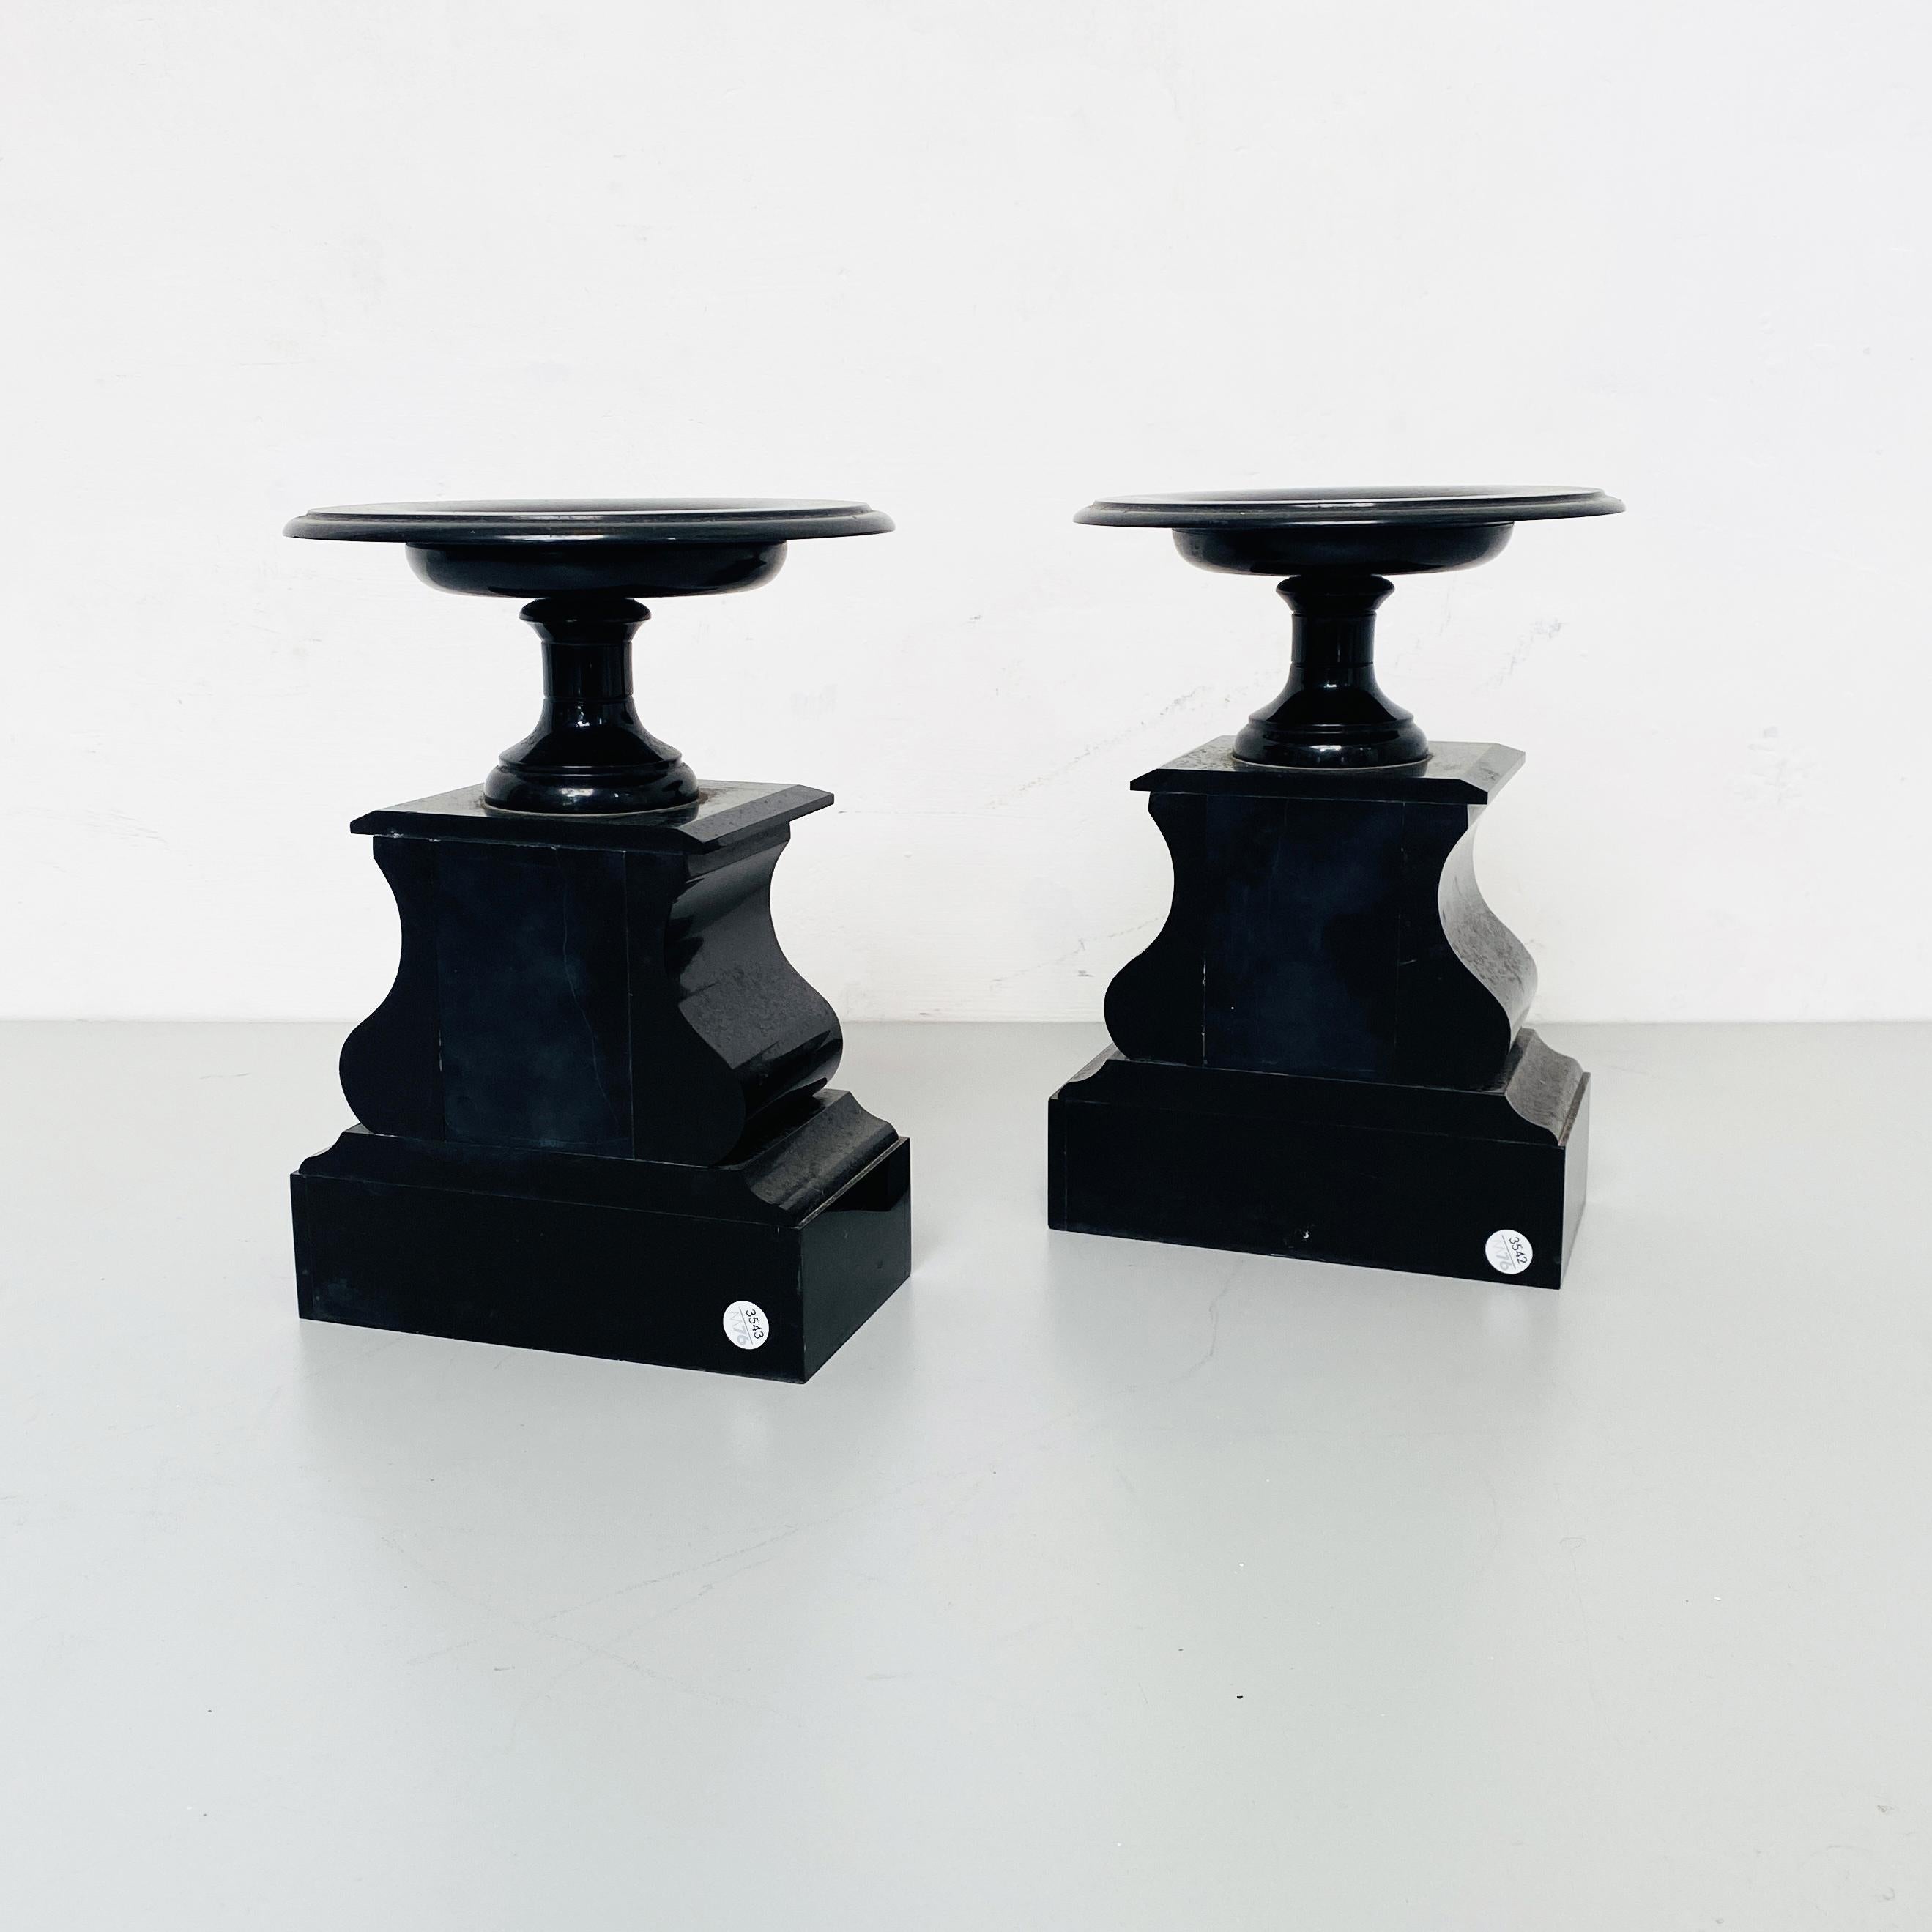 Mid-20th Century Italian Art Deco Black Onyx Centerpieces with Shape of a Balance, 1940s For Sale